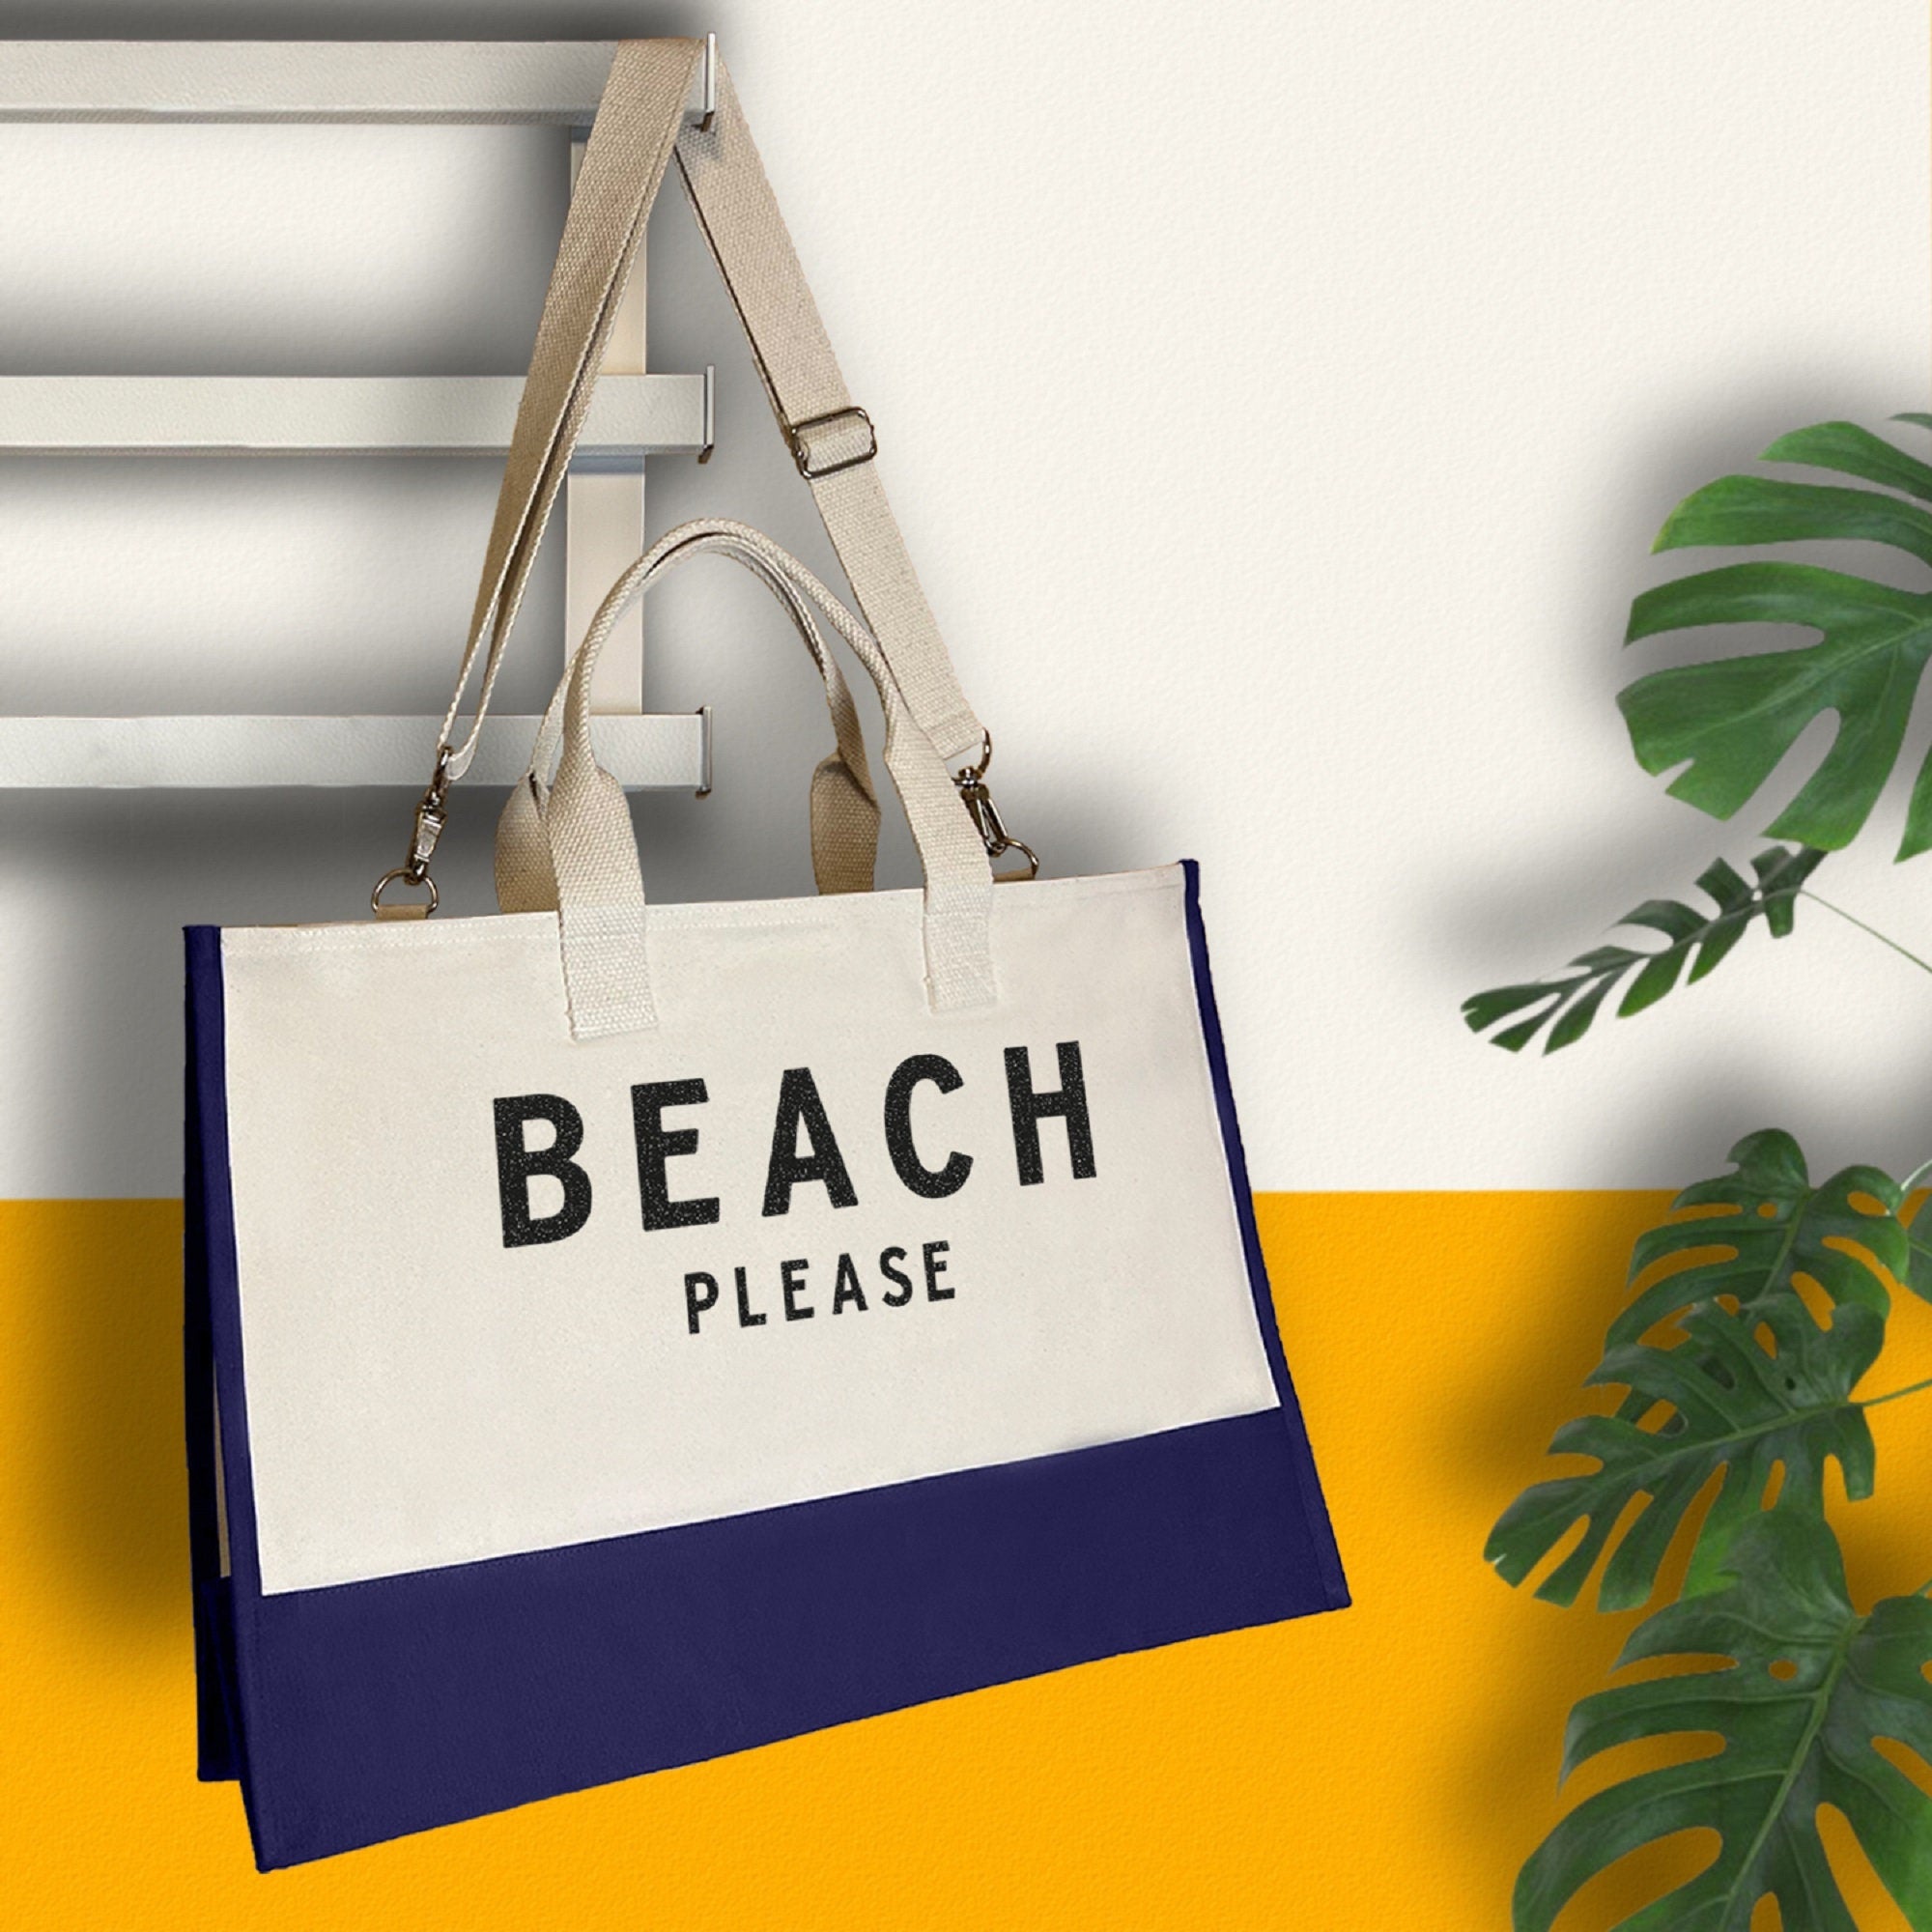 Beach Please Tote Bag XL - Oversized Chic Tote Bag with Zipper and Inner Pocket - Beach Bag for Women - Beach Tote - Gift for Her - Gift Bag